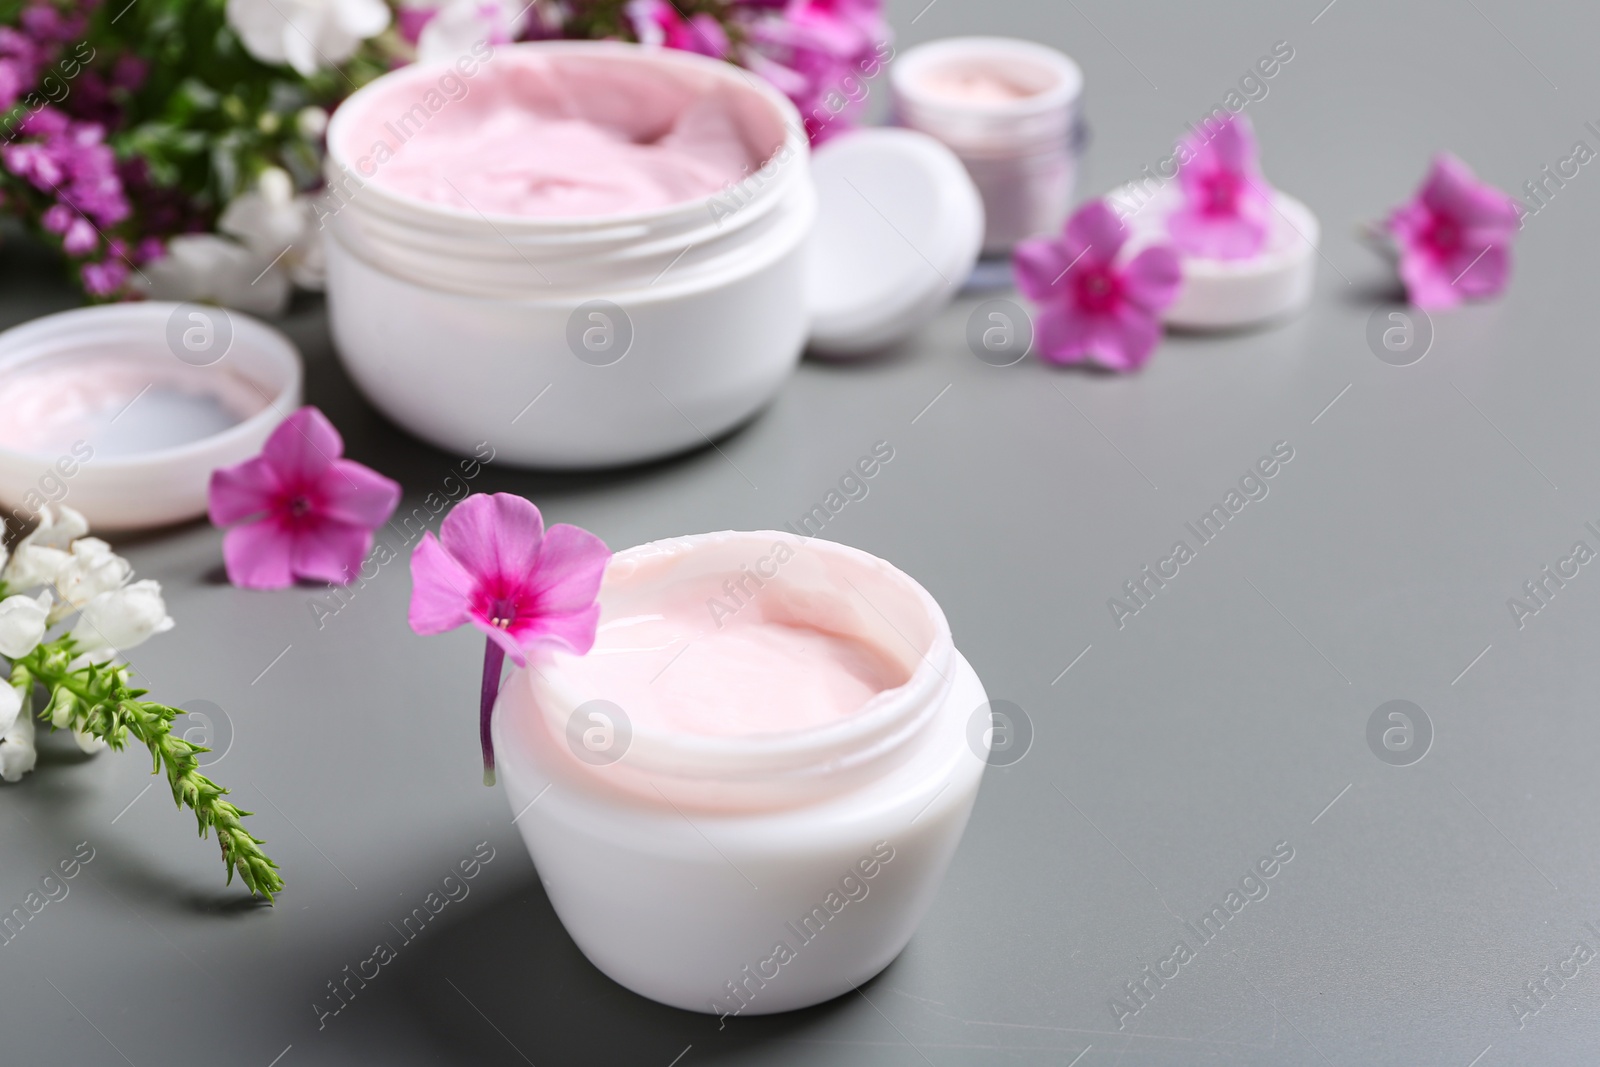 Photo of Jars of body cream and flowers on grey background